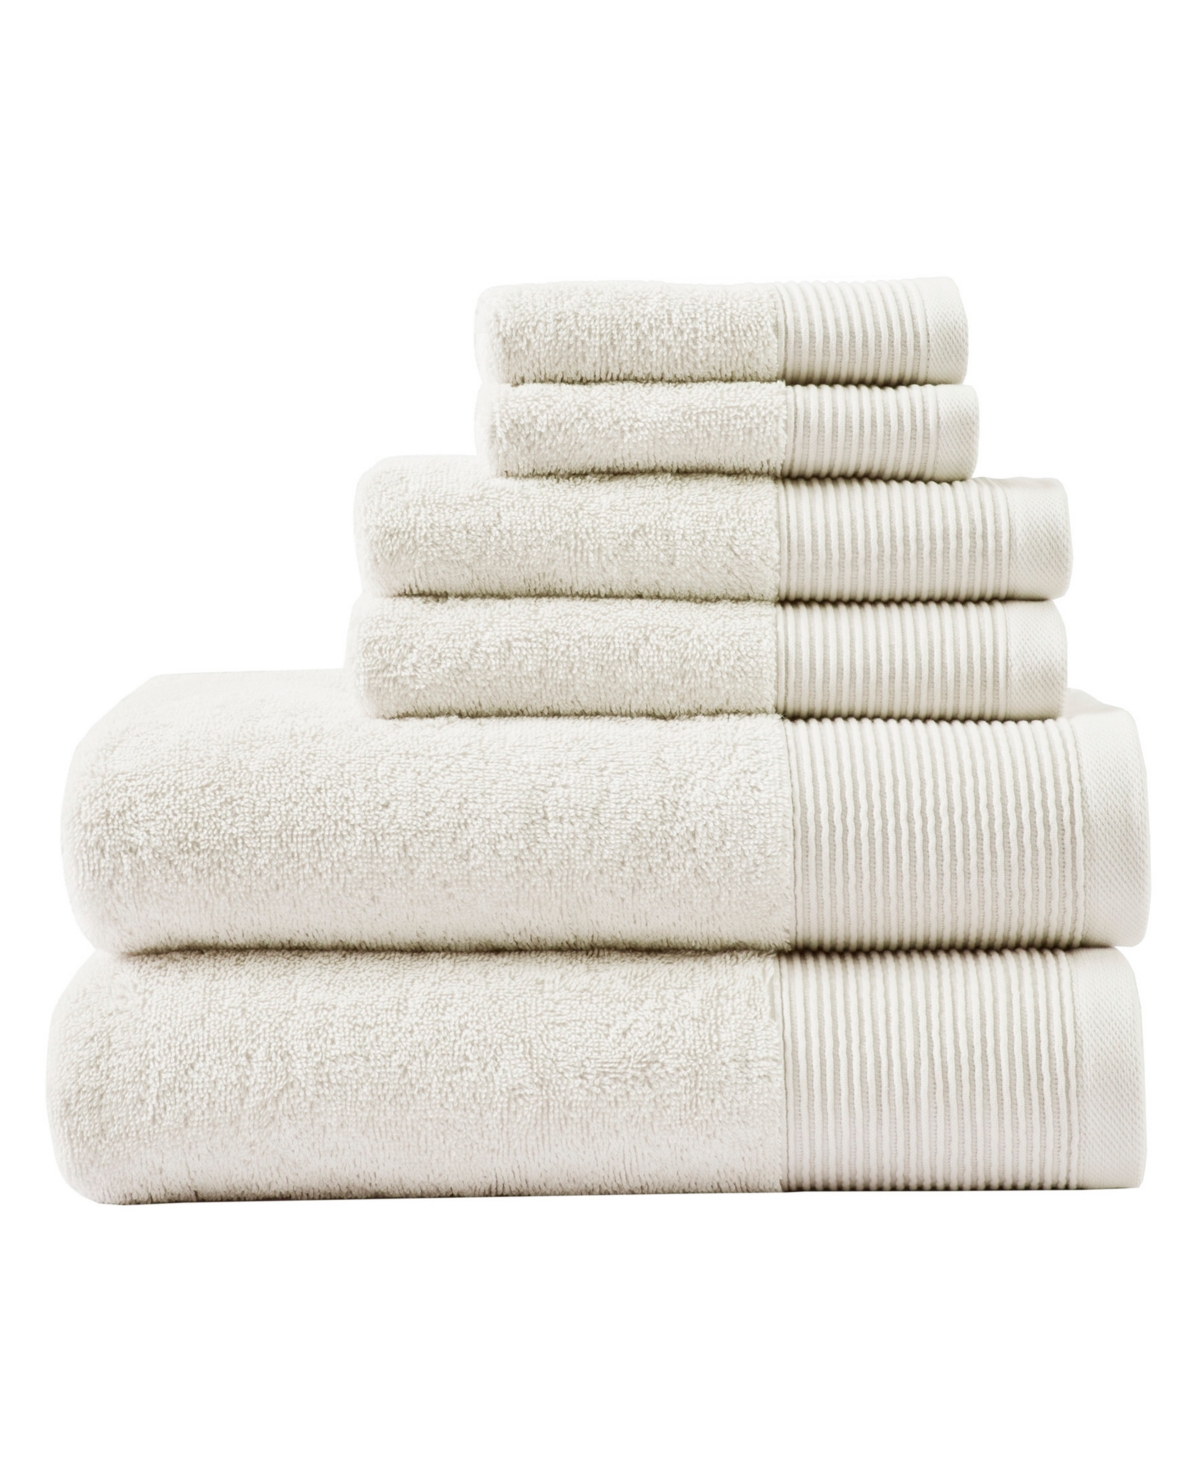 Beautyrest Nuage Cotton Tencel Blend Antimicrobial 6 Piece Towel Set Bedding In Ivory